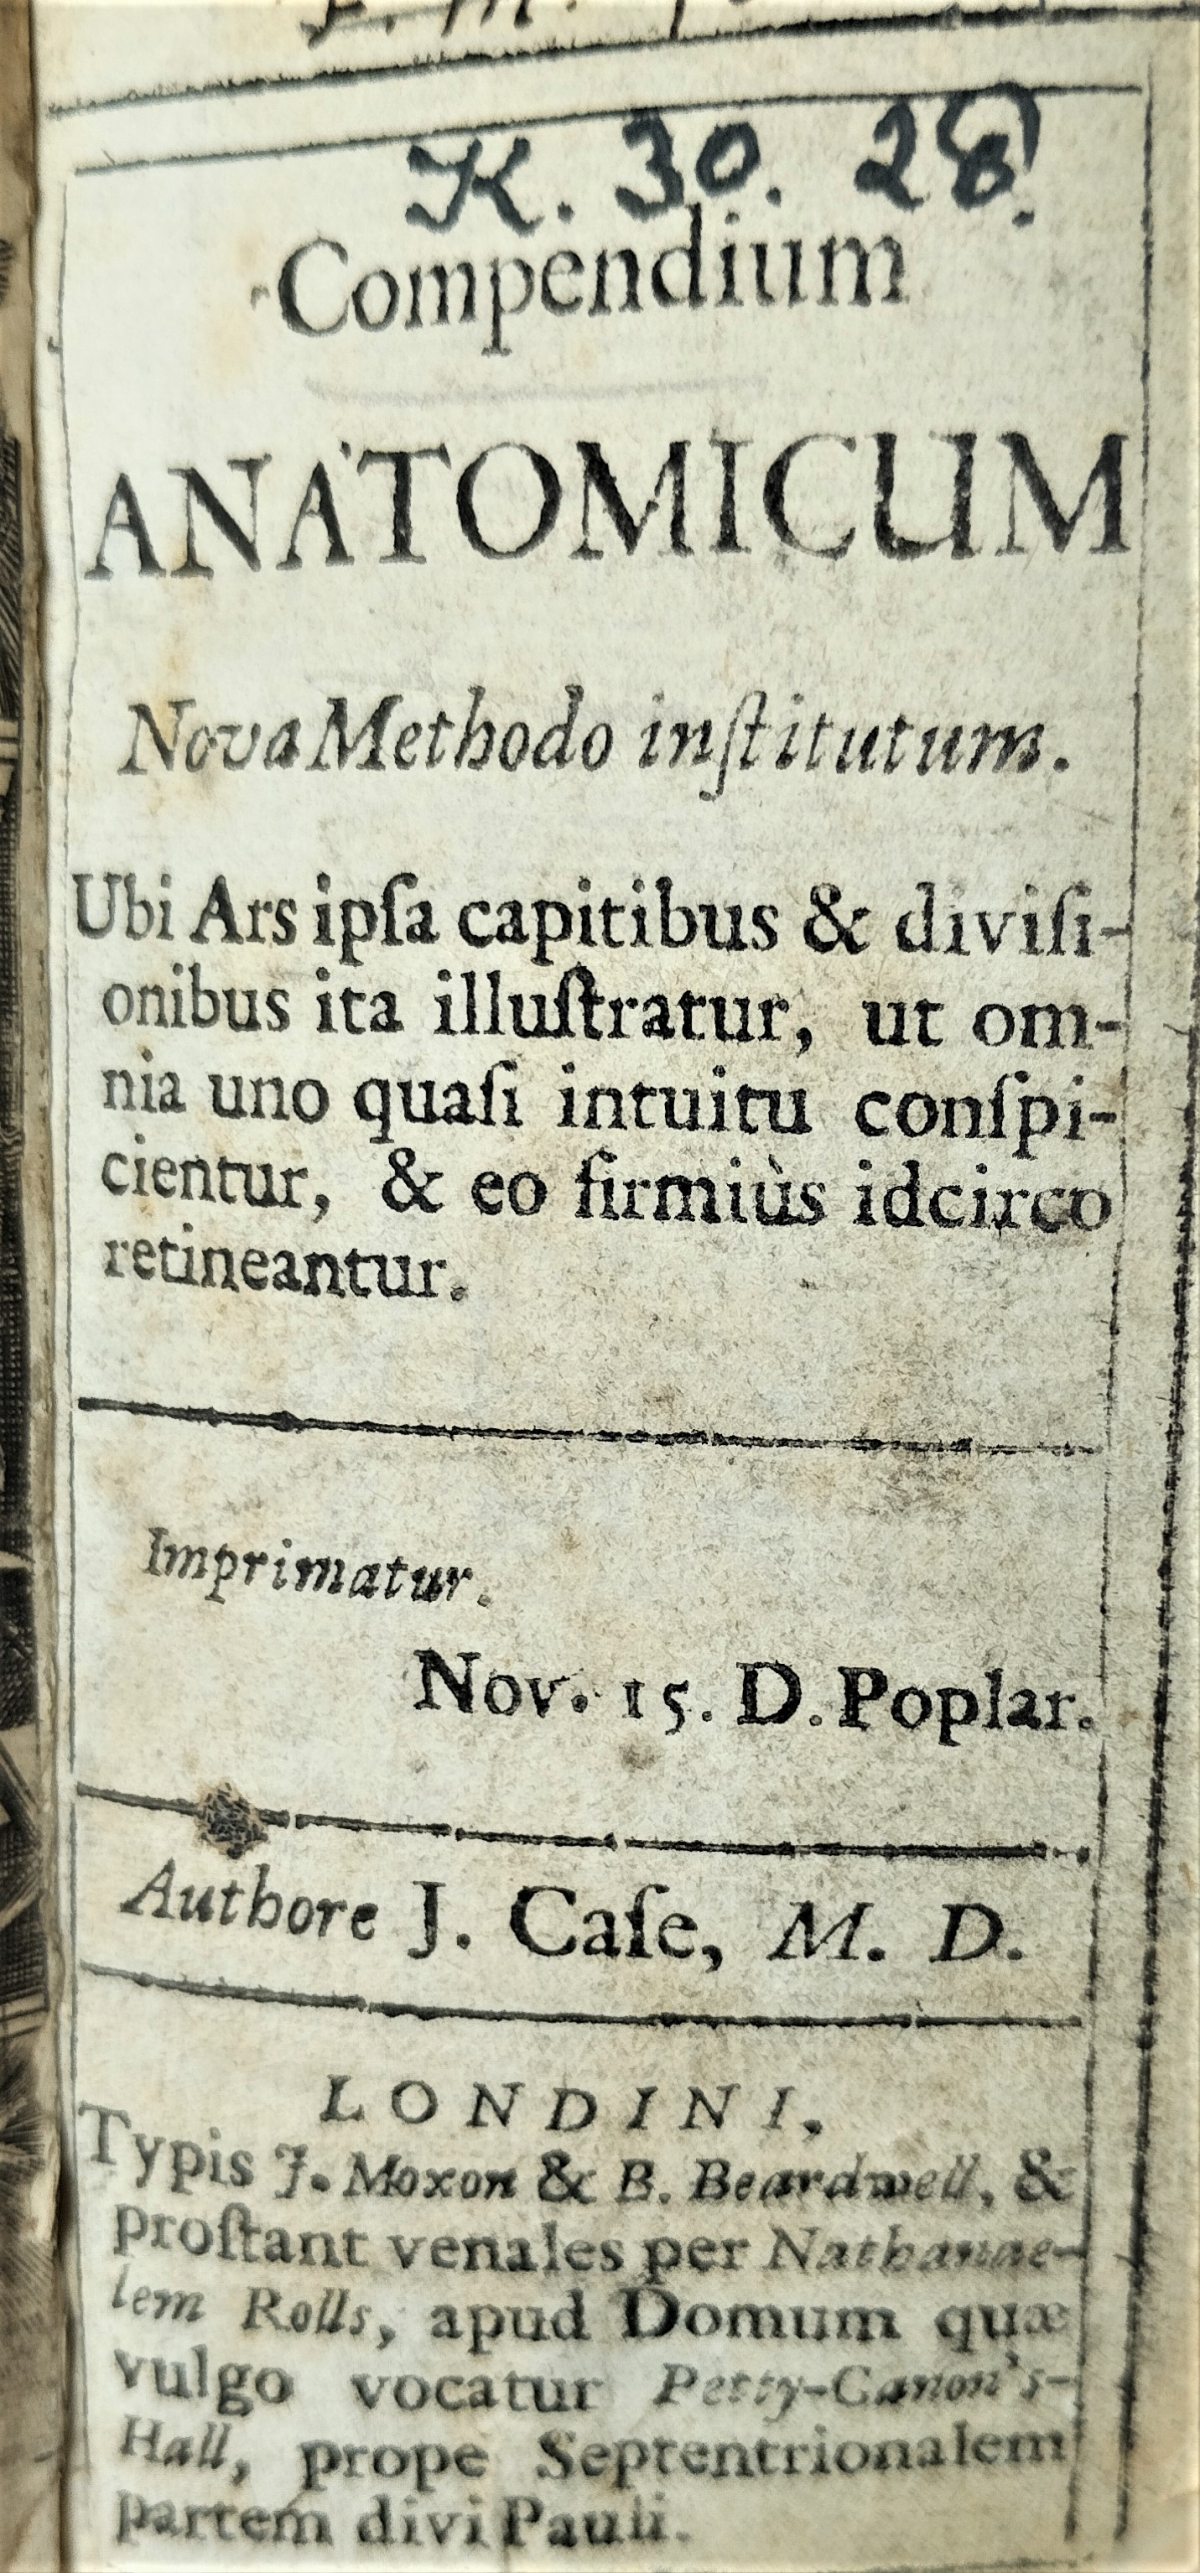 Title page of the book "Compendium anatomicum" by John Case (1695). 